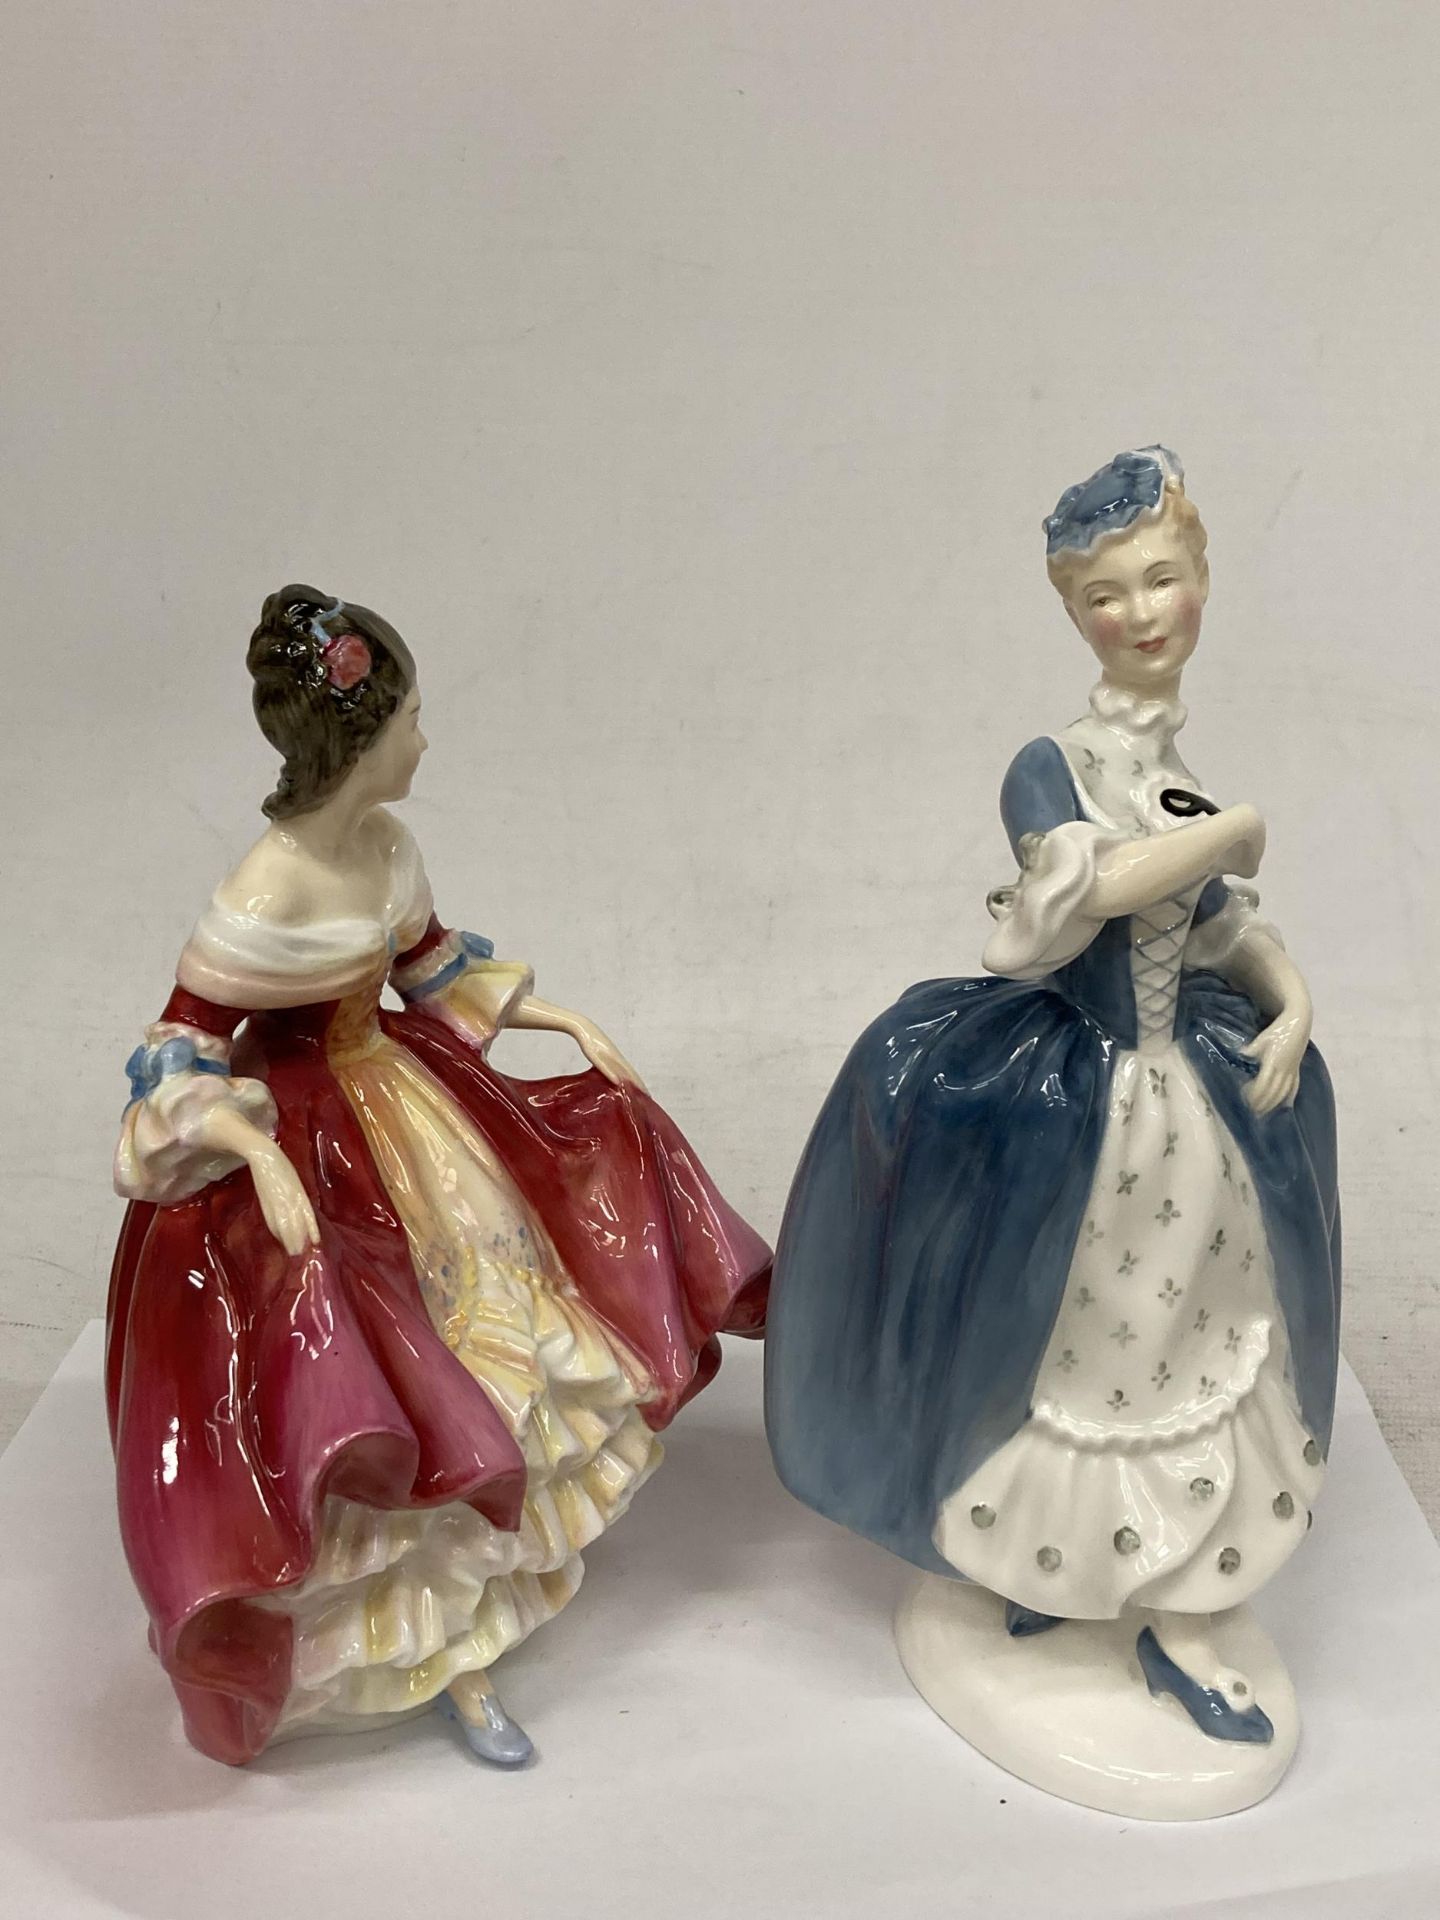 TWO ROYAL DOULTON FIGURINES "MASQUERADE" AND "SOUTHERN BELLE" - Image 2 of 4